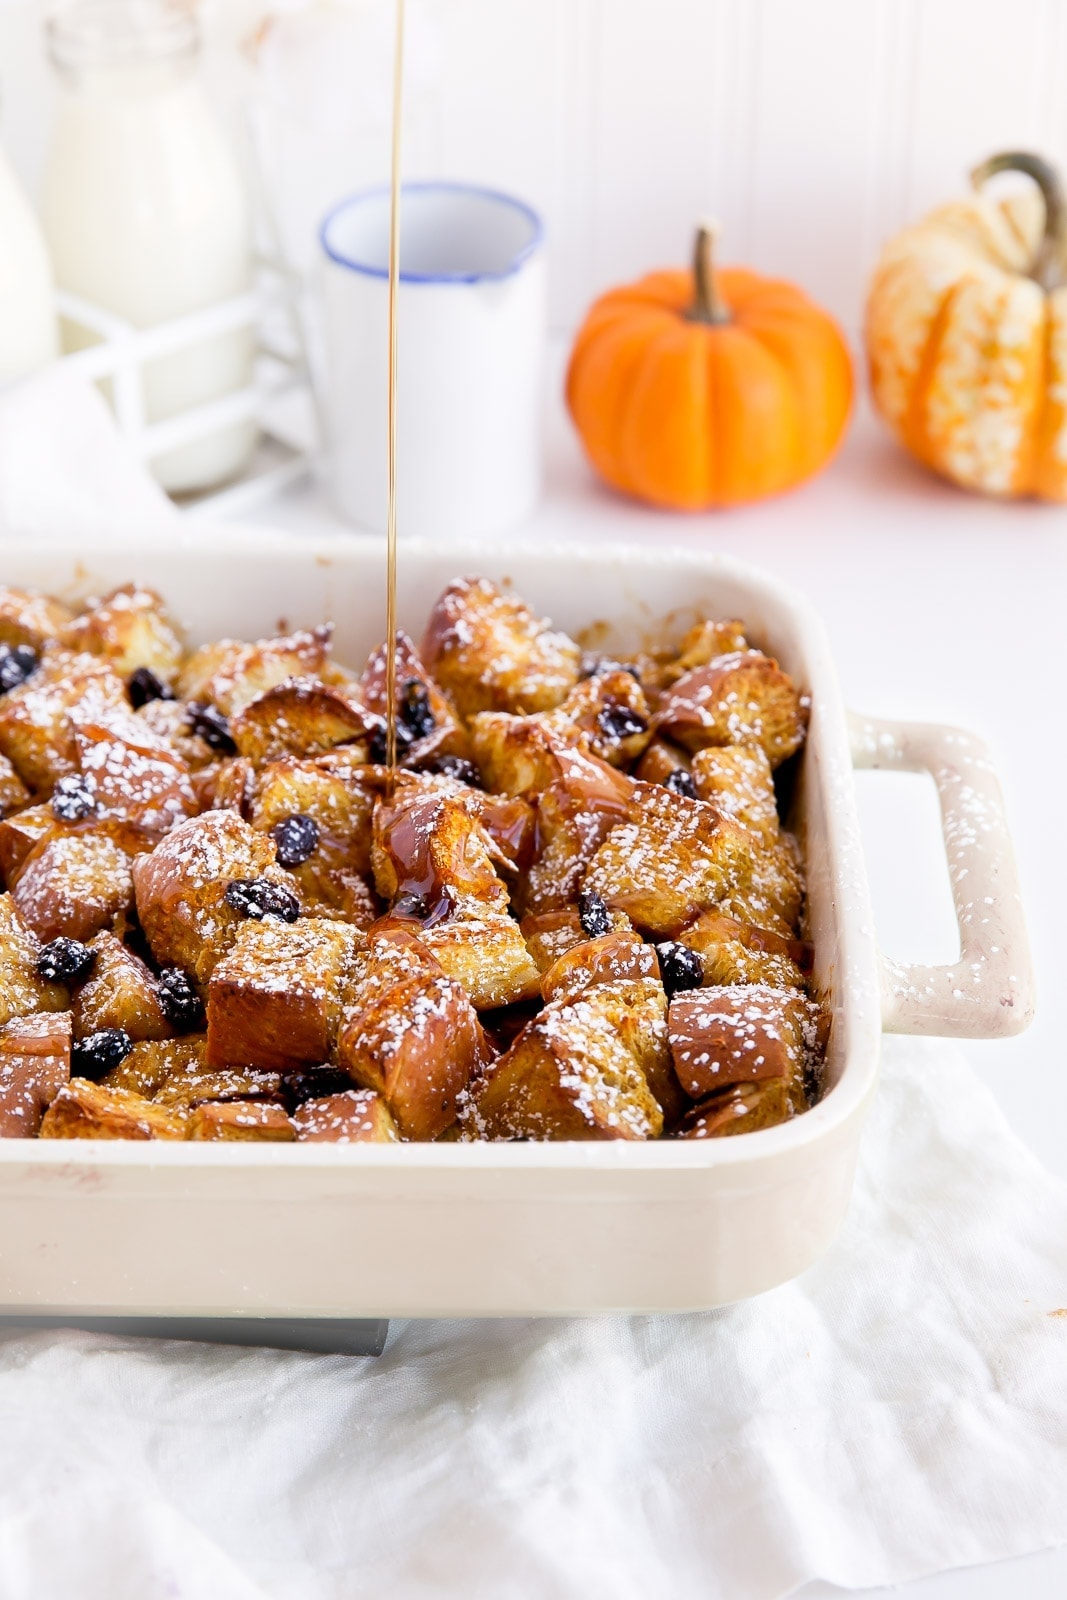 A custard-like overnight french toast bake with challah, raisins, and pumpkin. All the work is done the day before, so in the morning you can enjoy a quick and easy holiday breakfast!